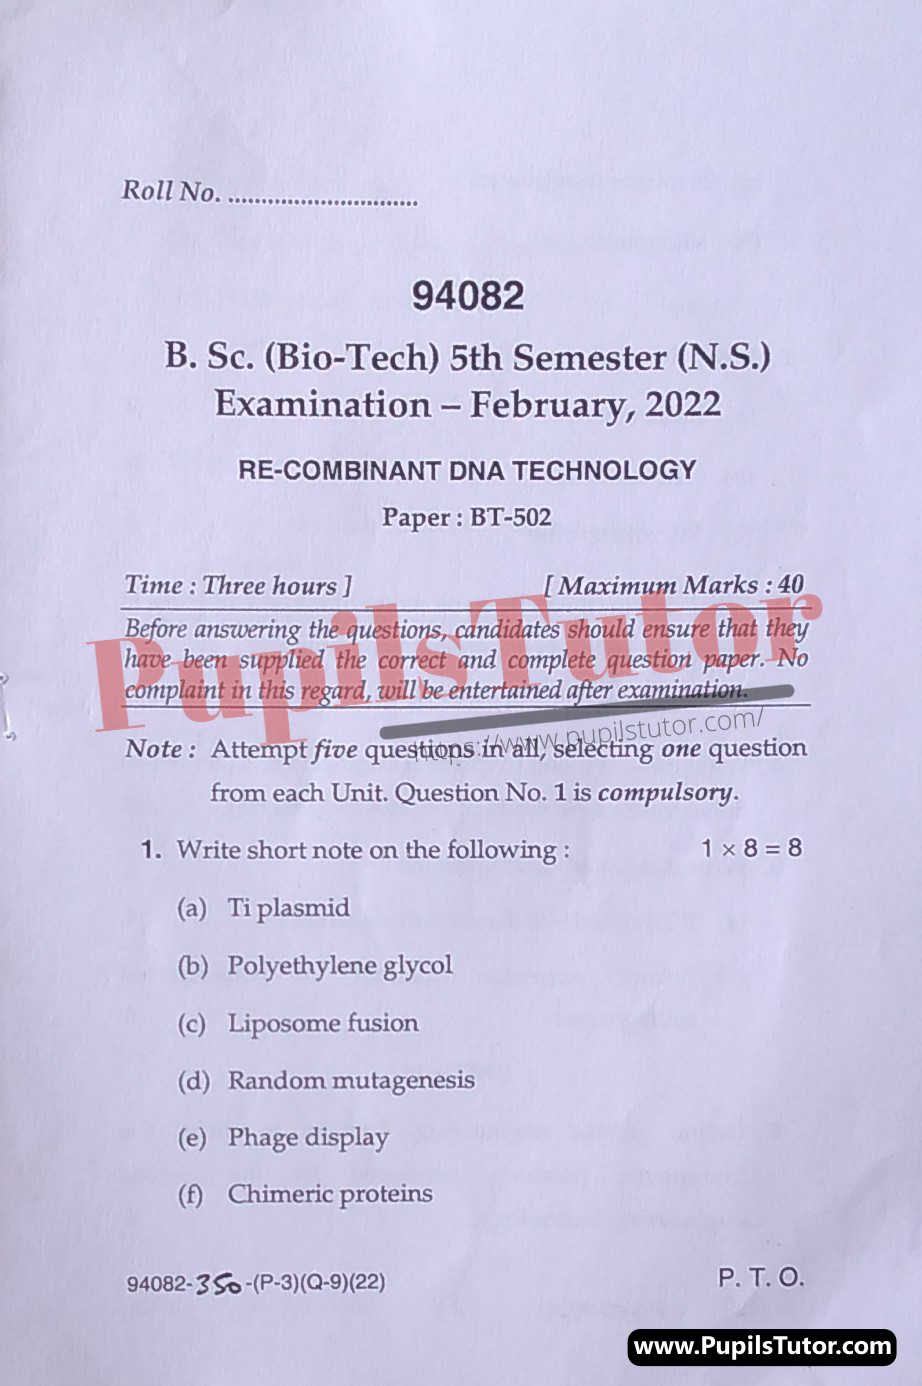 MDU (Maharshi Dayanand University, Rohtak Haryana) BSc Biotechnology Pass Course 5th Semester Previous Year Re-Combinant DNA Technology Question Paper For February, 2022 Exam (Question Paper Page 1) - pupilstutor.com